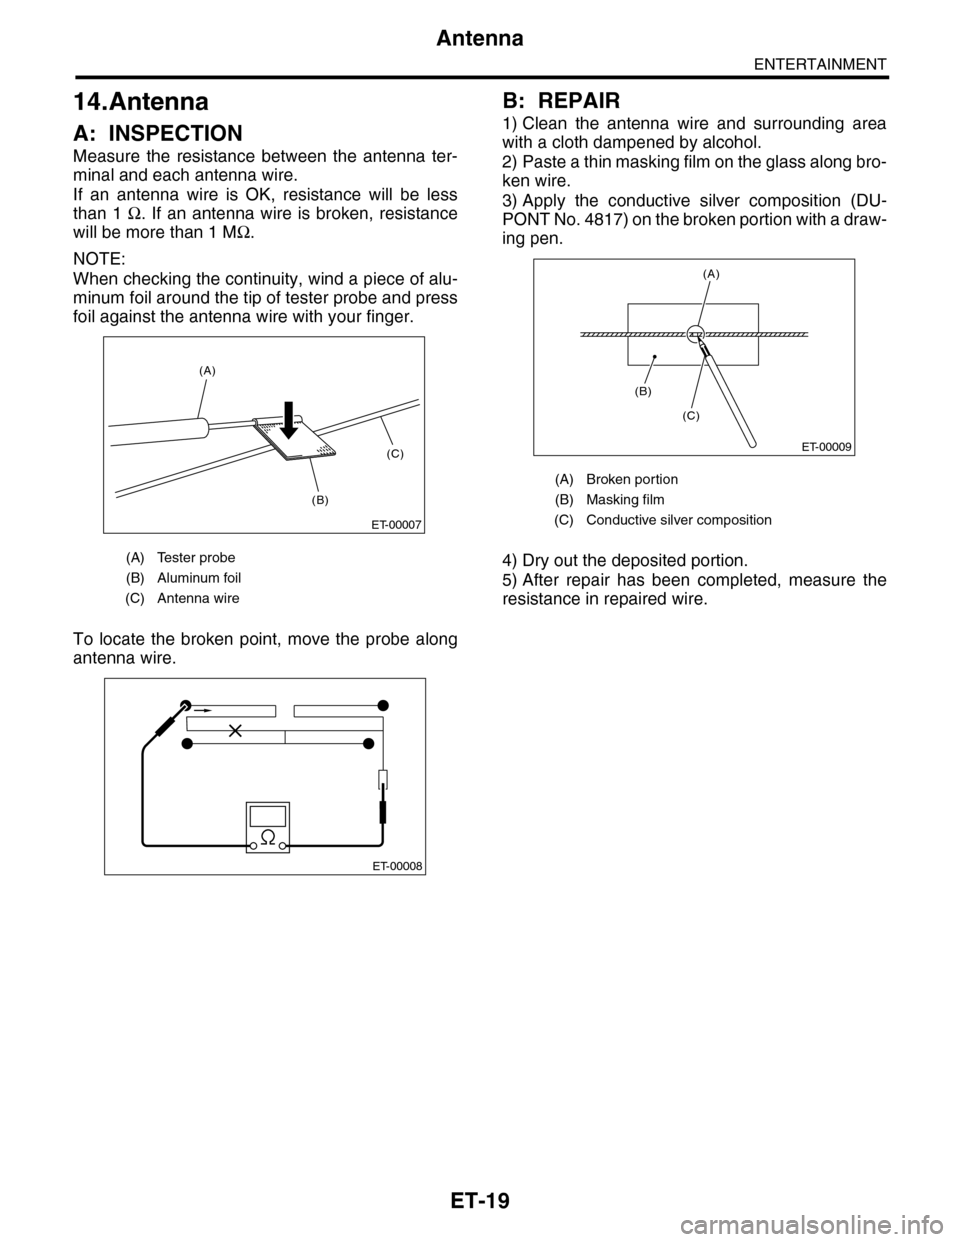 SUBARU TRIBECA 2009 1.G Service Workshop Manual ET-19
Antenna
ENTERTAINMENT
14.Antenna
A: INSPECTION
Measure  the  resistance  between  the  antenna  ter-
minal and each antenna wire.
If  an  antenna  wire  is  OK,  resistance  will  be  less
than 